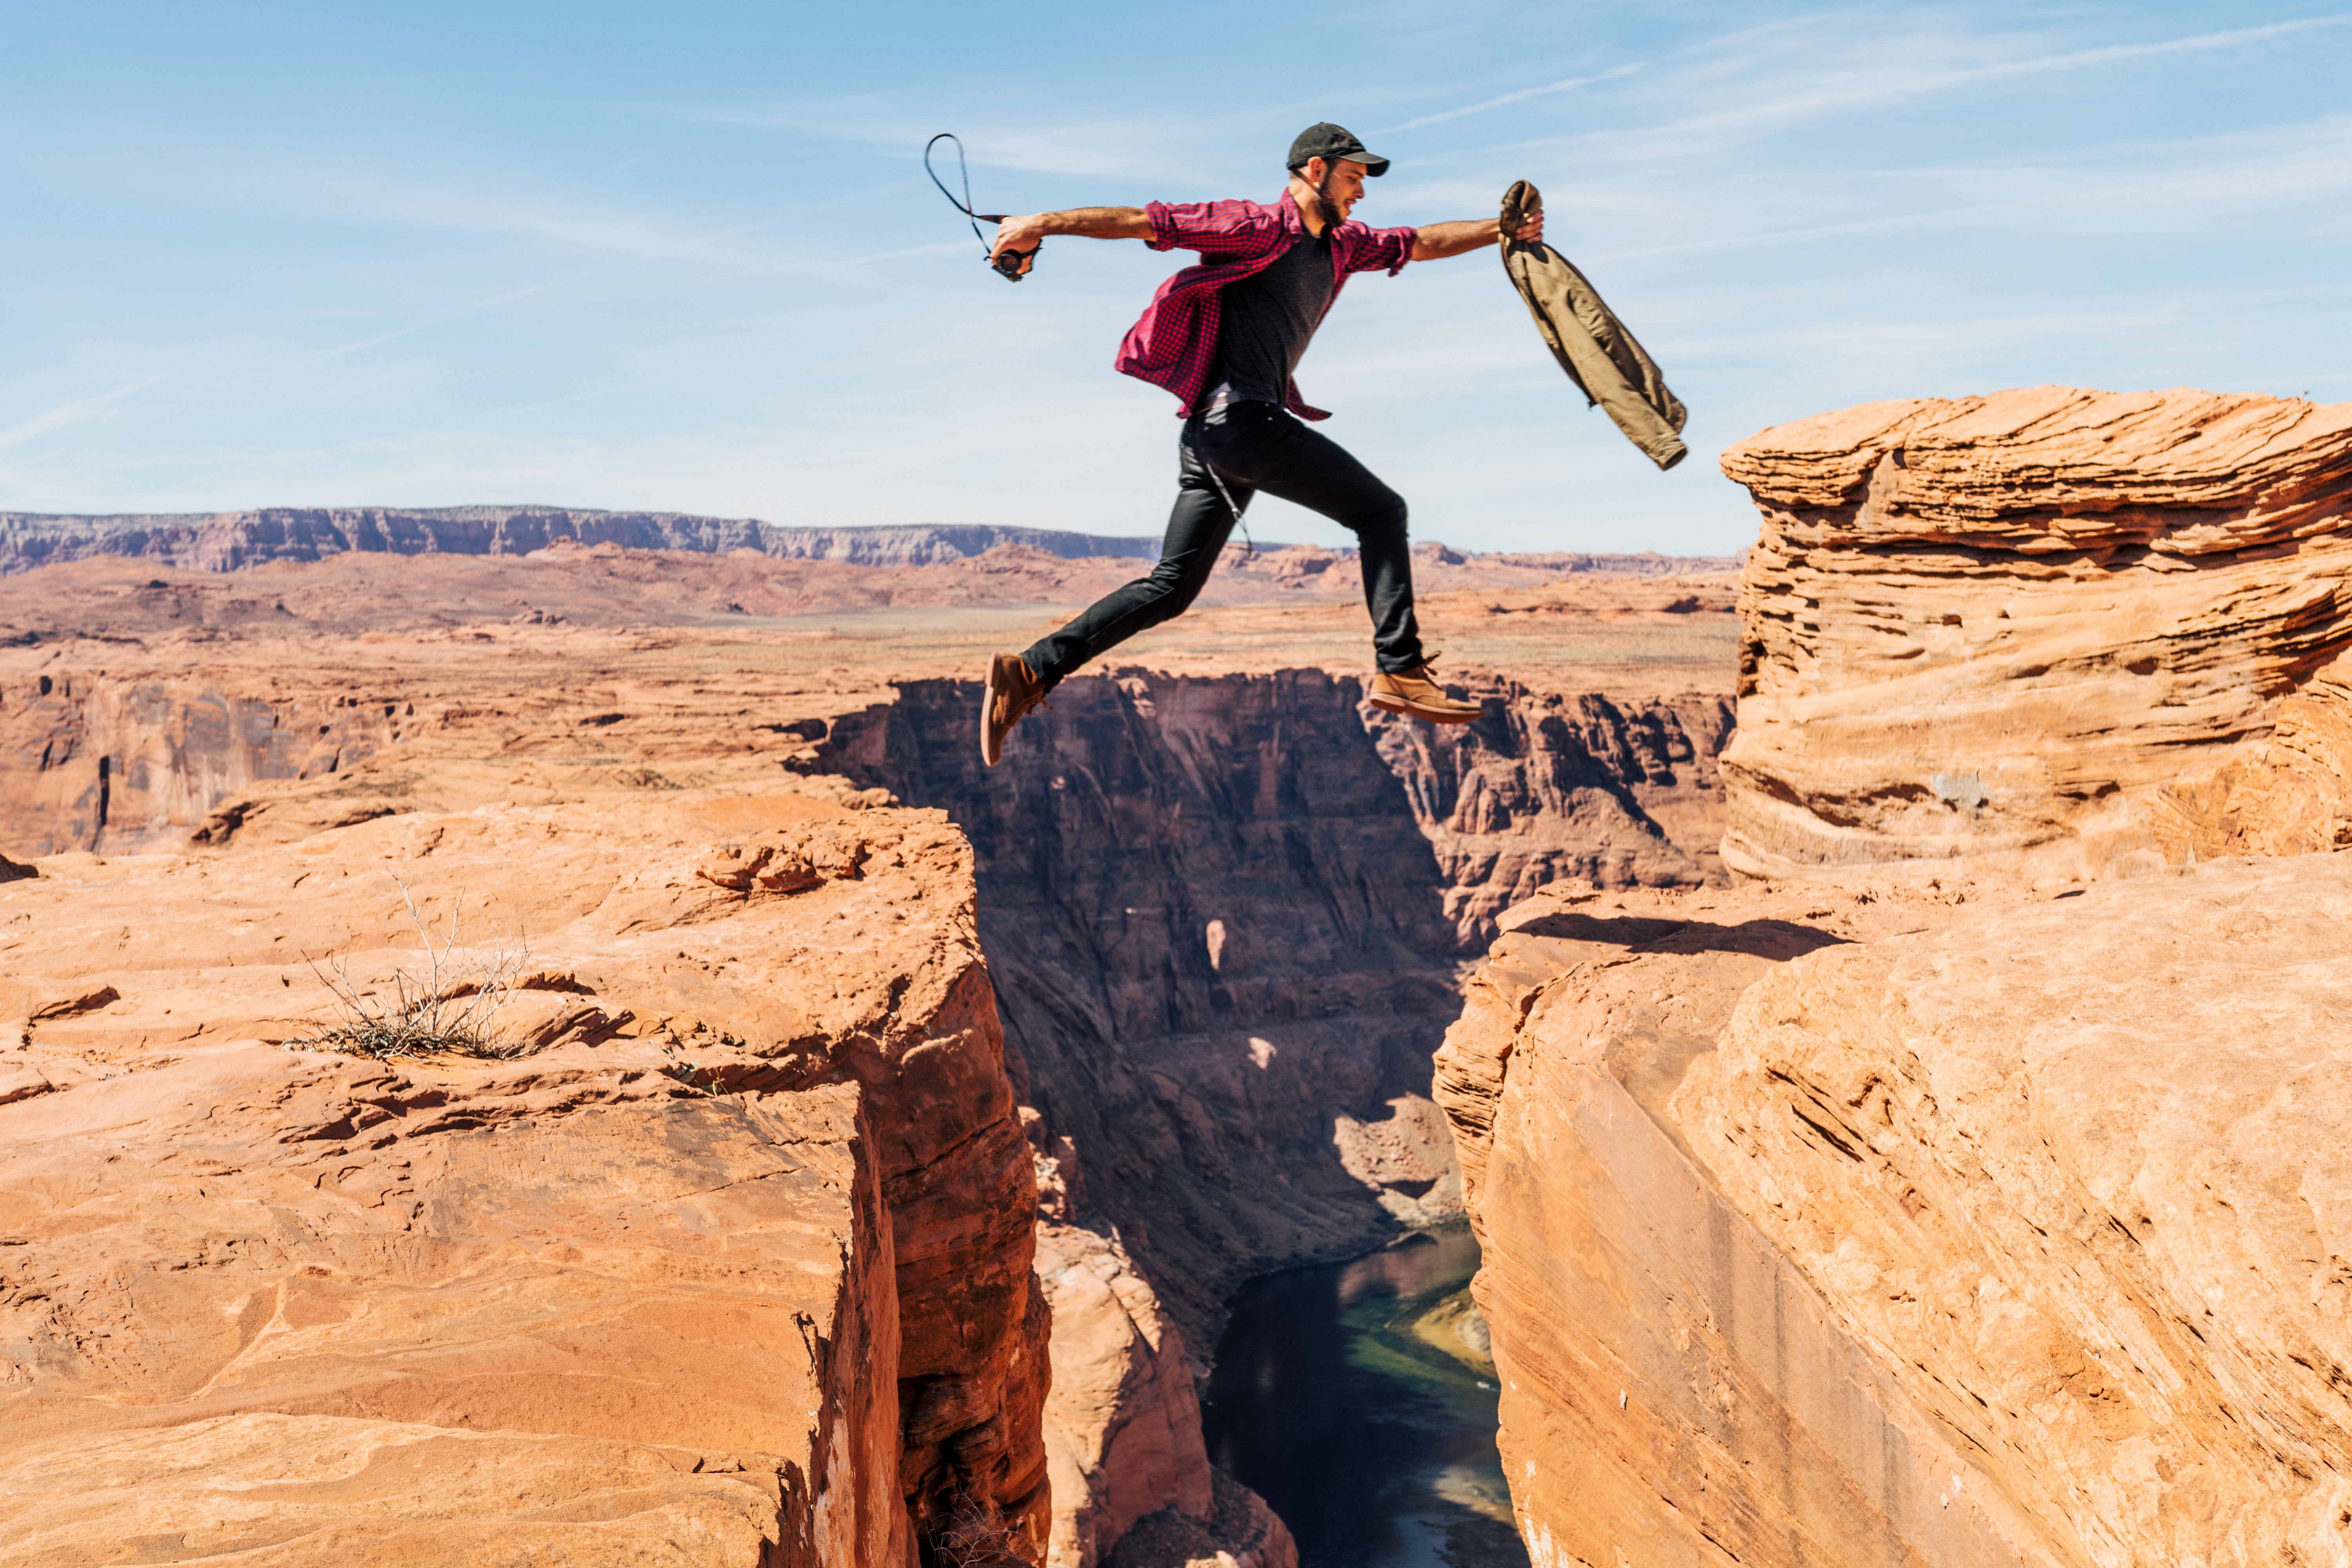 A man leaping over a gorge - spacing biases